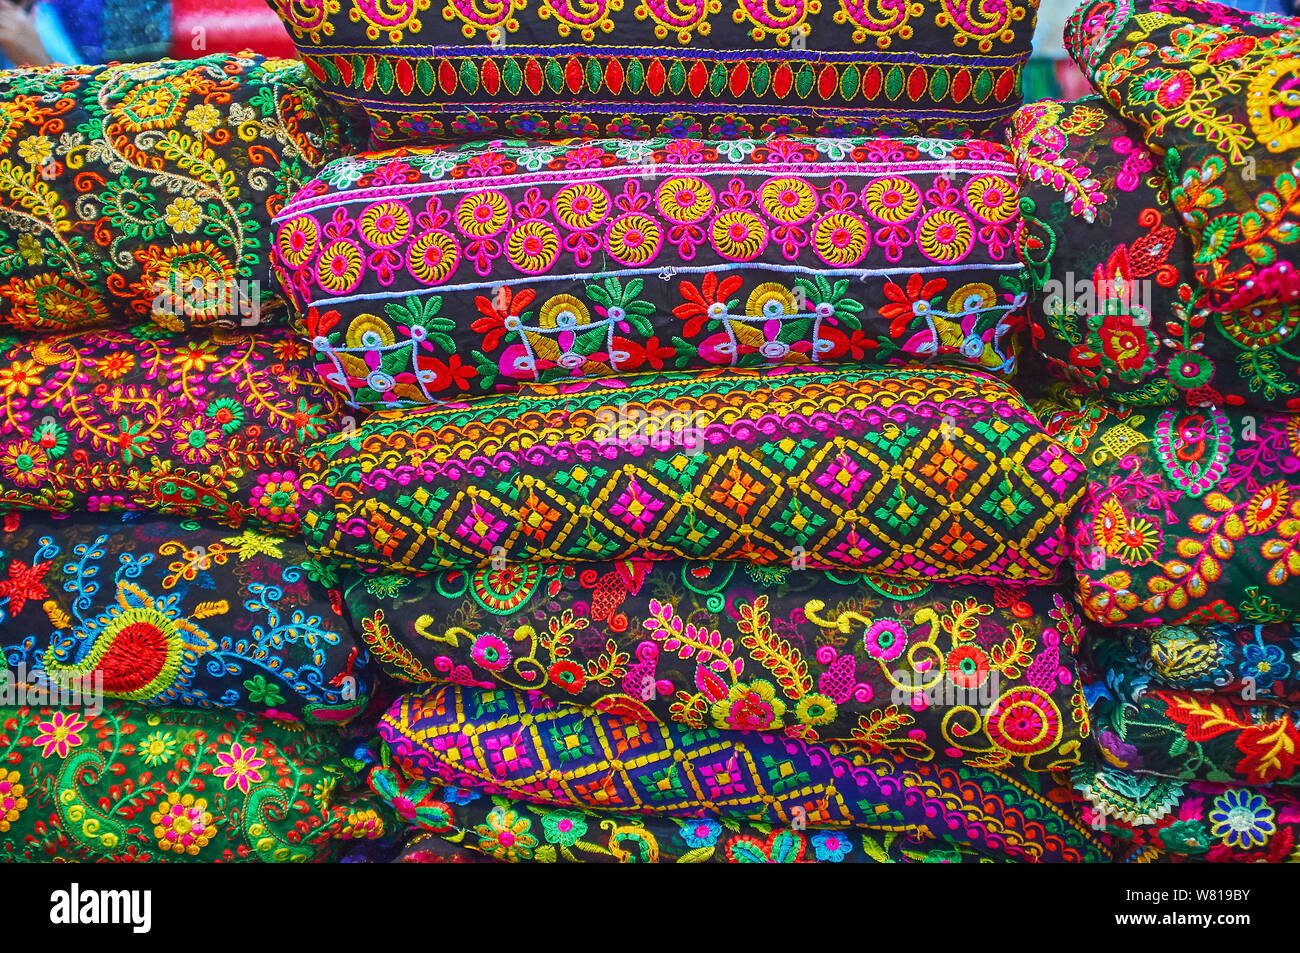 The heap of embroidered textiles, tapestries and bedcovers with colorful floral and authentic patterns in shop of Vakil Bazaar, Shiraz, Iran Stock Photo